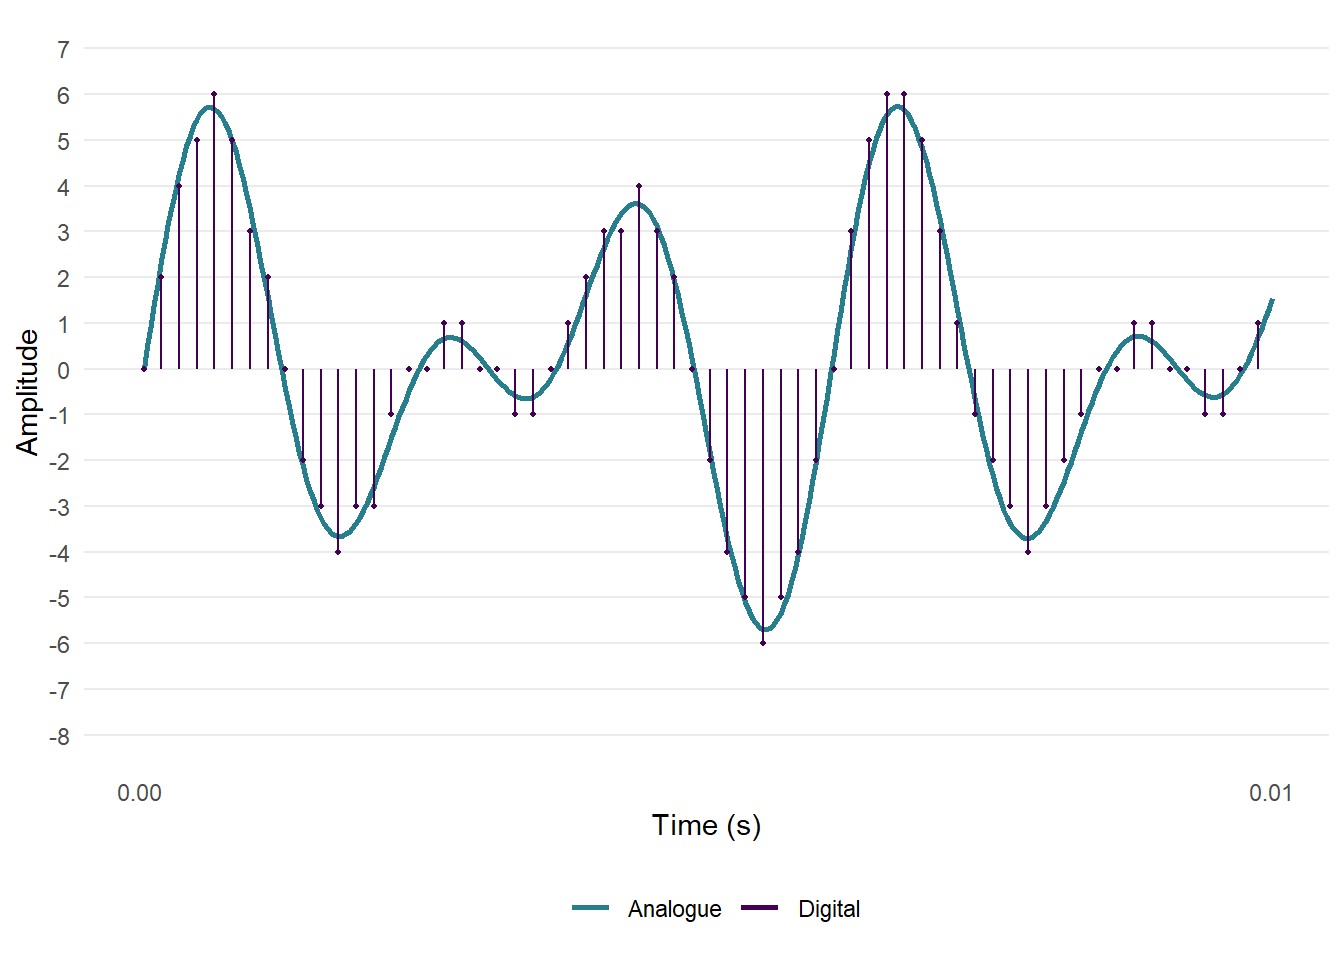 An analogue audio waveform, digitally sampled at 32 kHz with 4-bit quantisation.